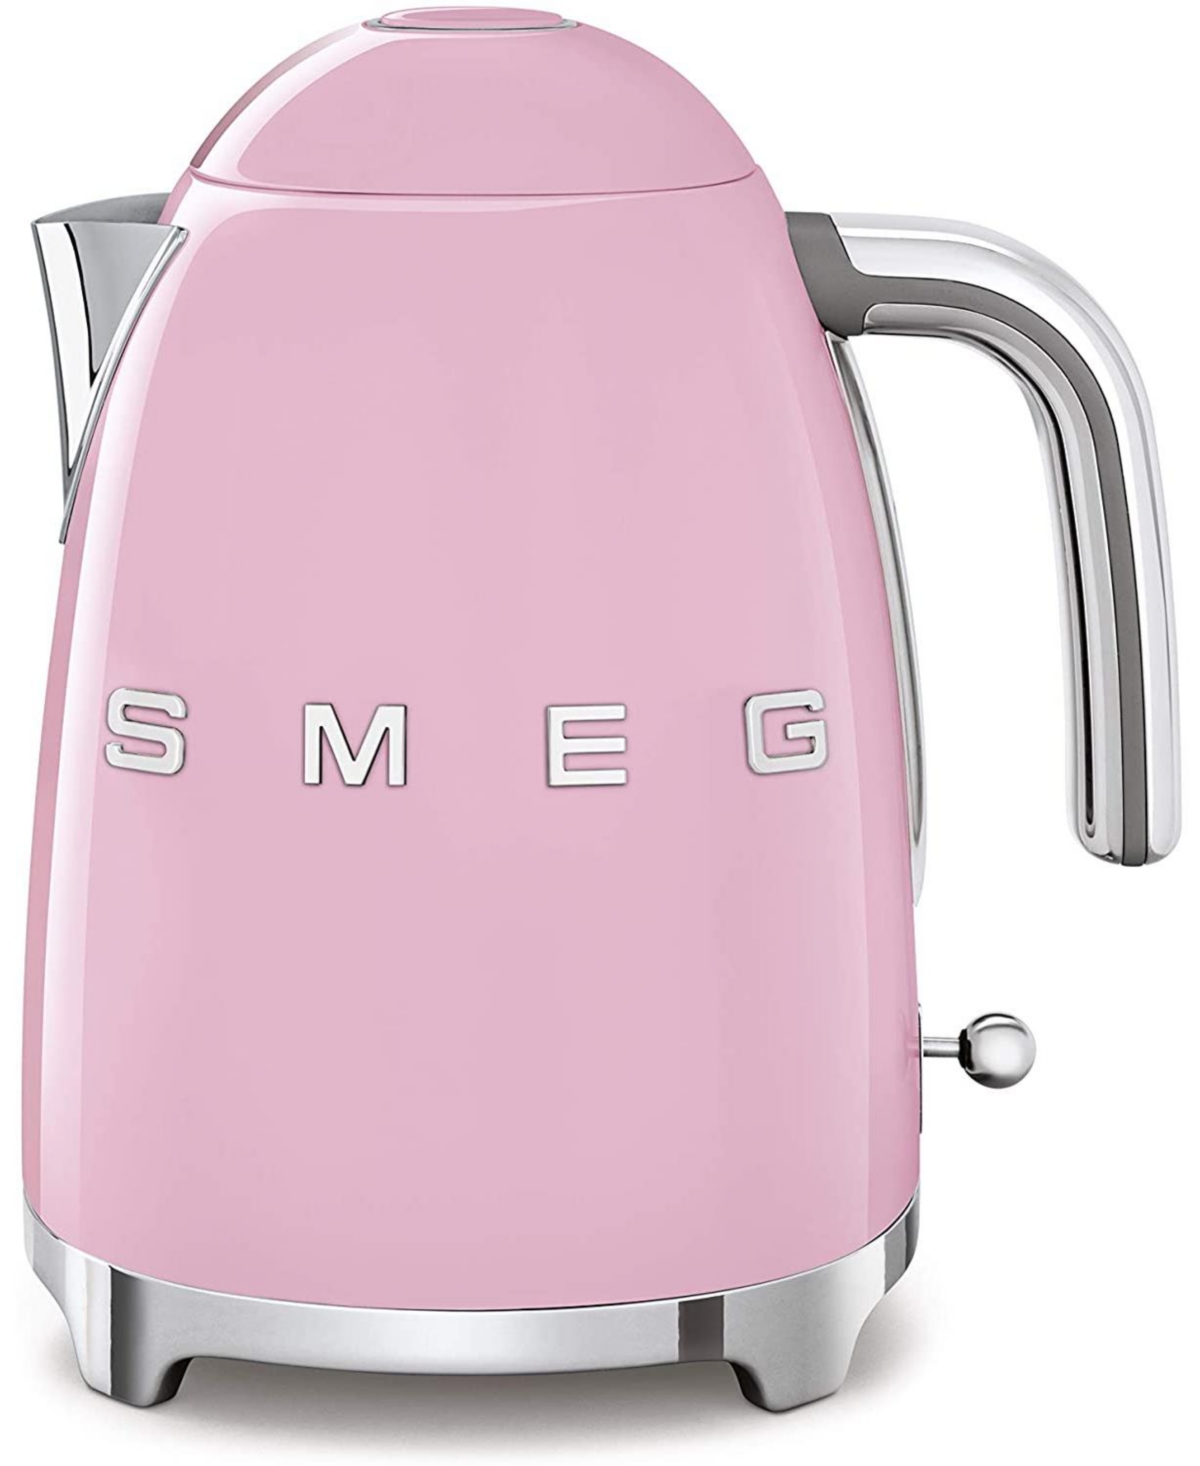 Smeg Electric Kettle In Pink